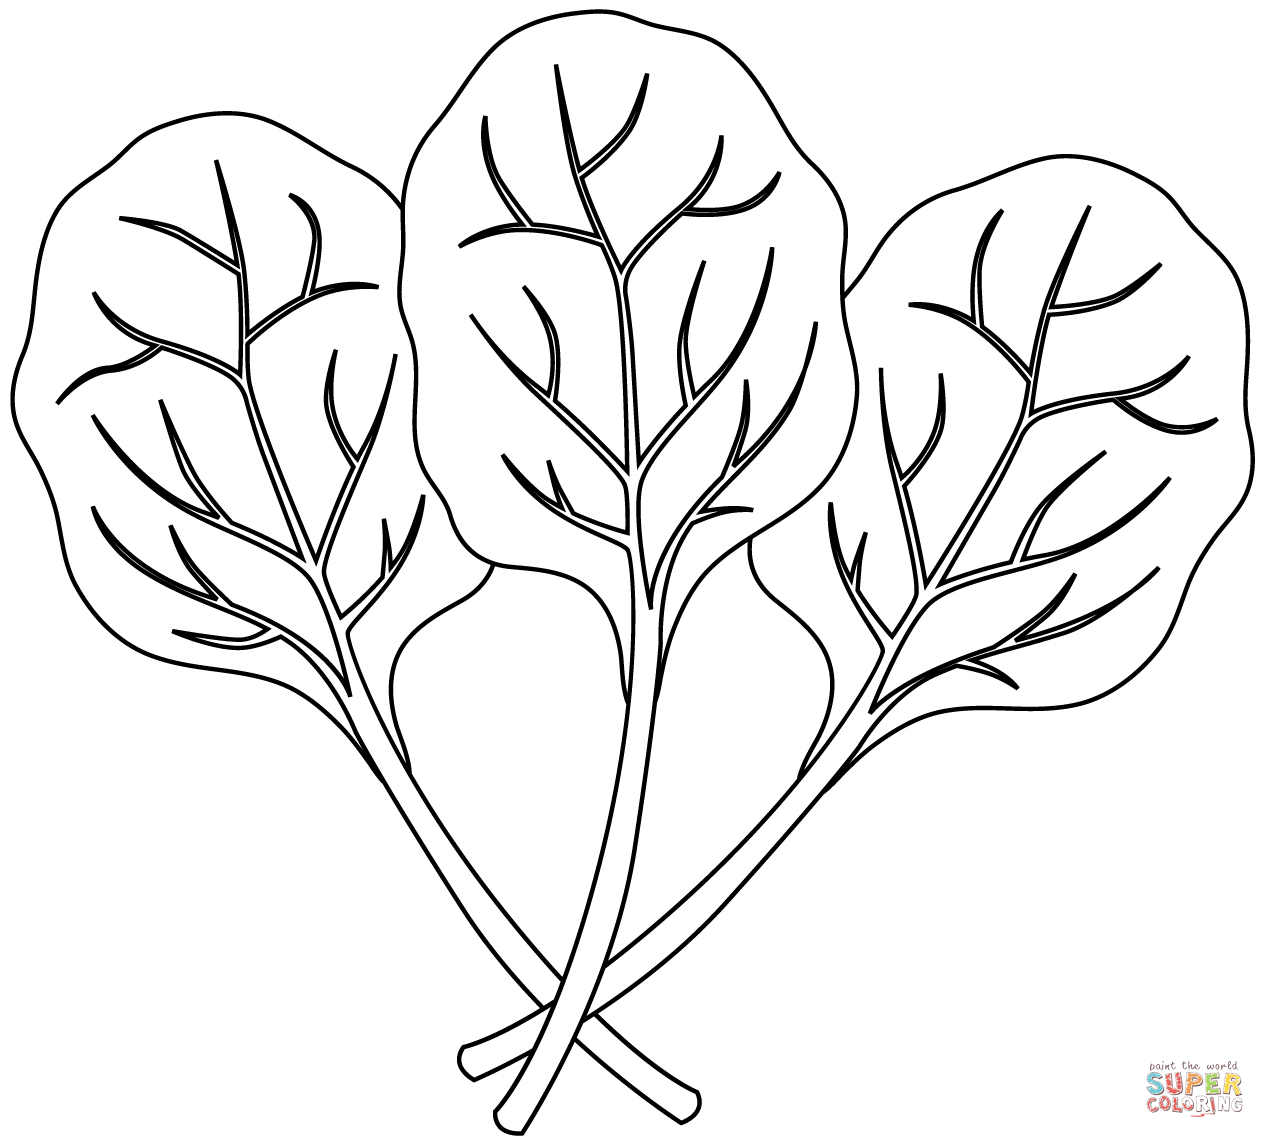 Spinach Coloring Page | Free Printable Coloring Pages - Coloring Home